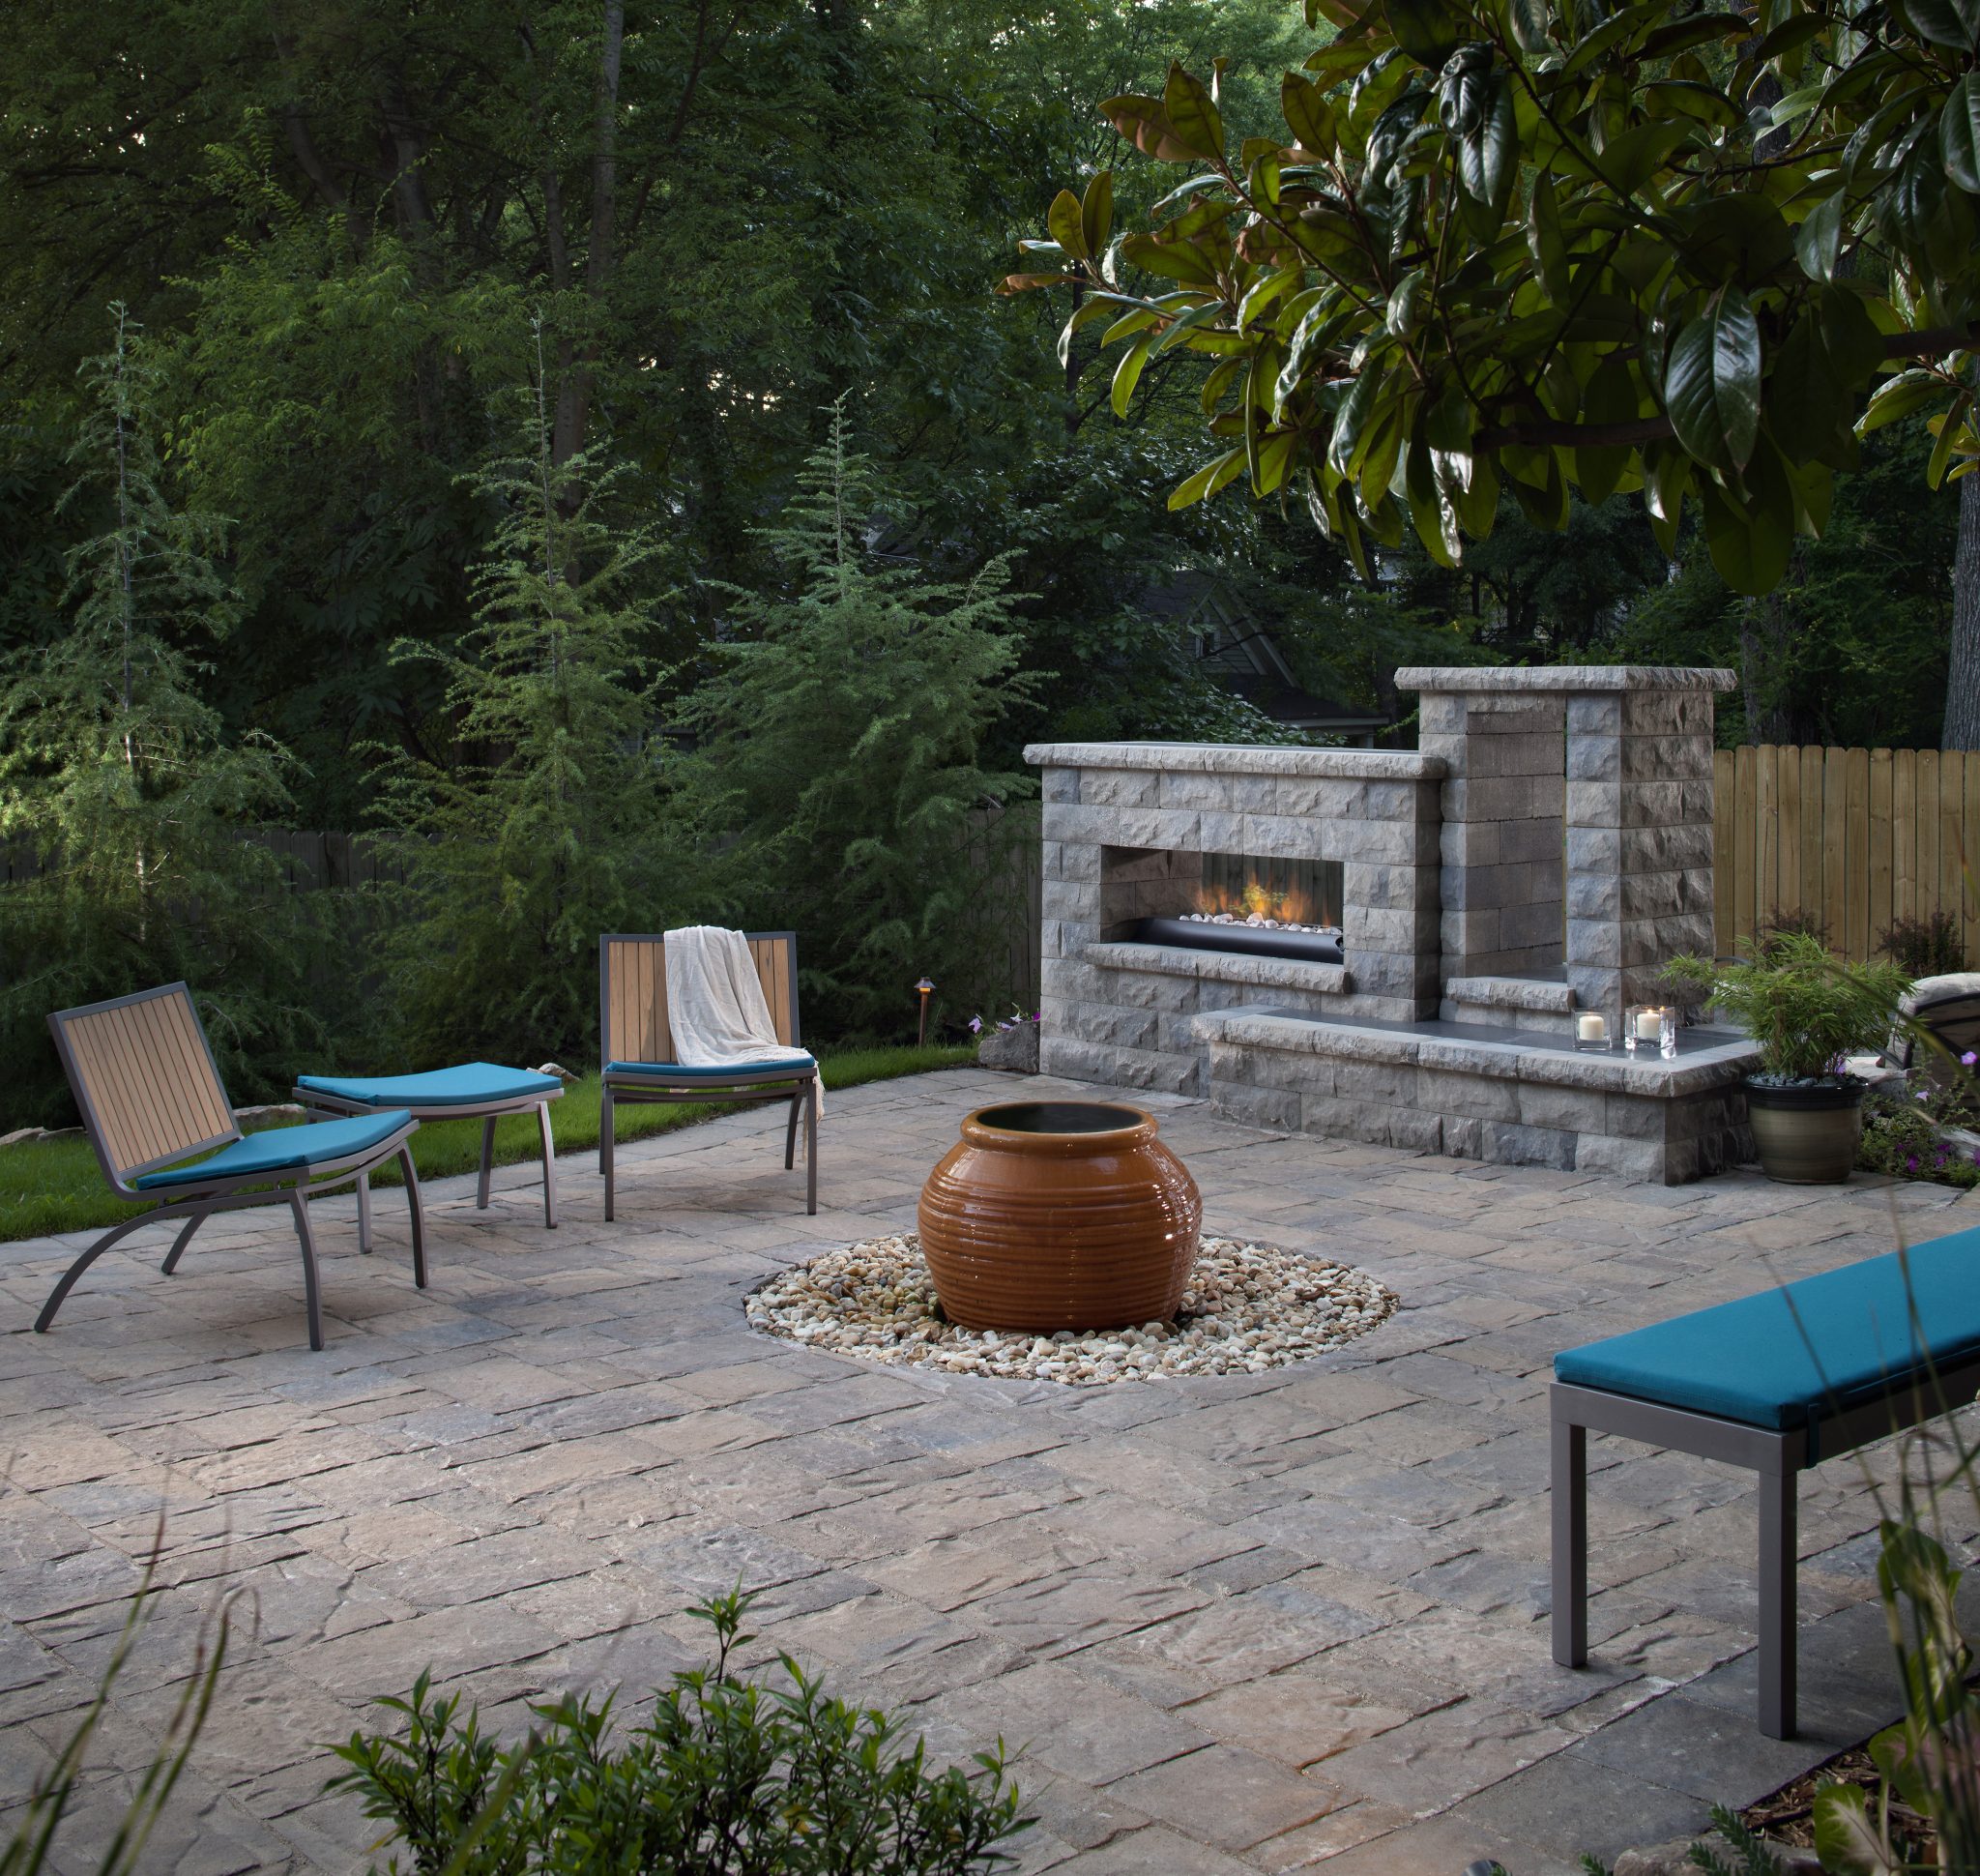 Wood Burning Fire Pits, Wood Chips For Fire Pit